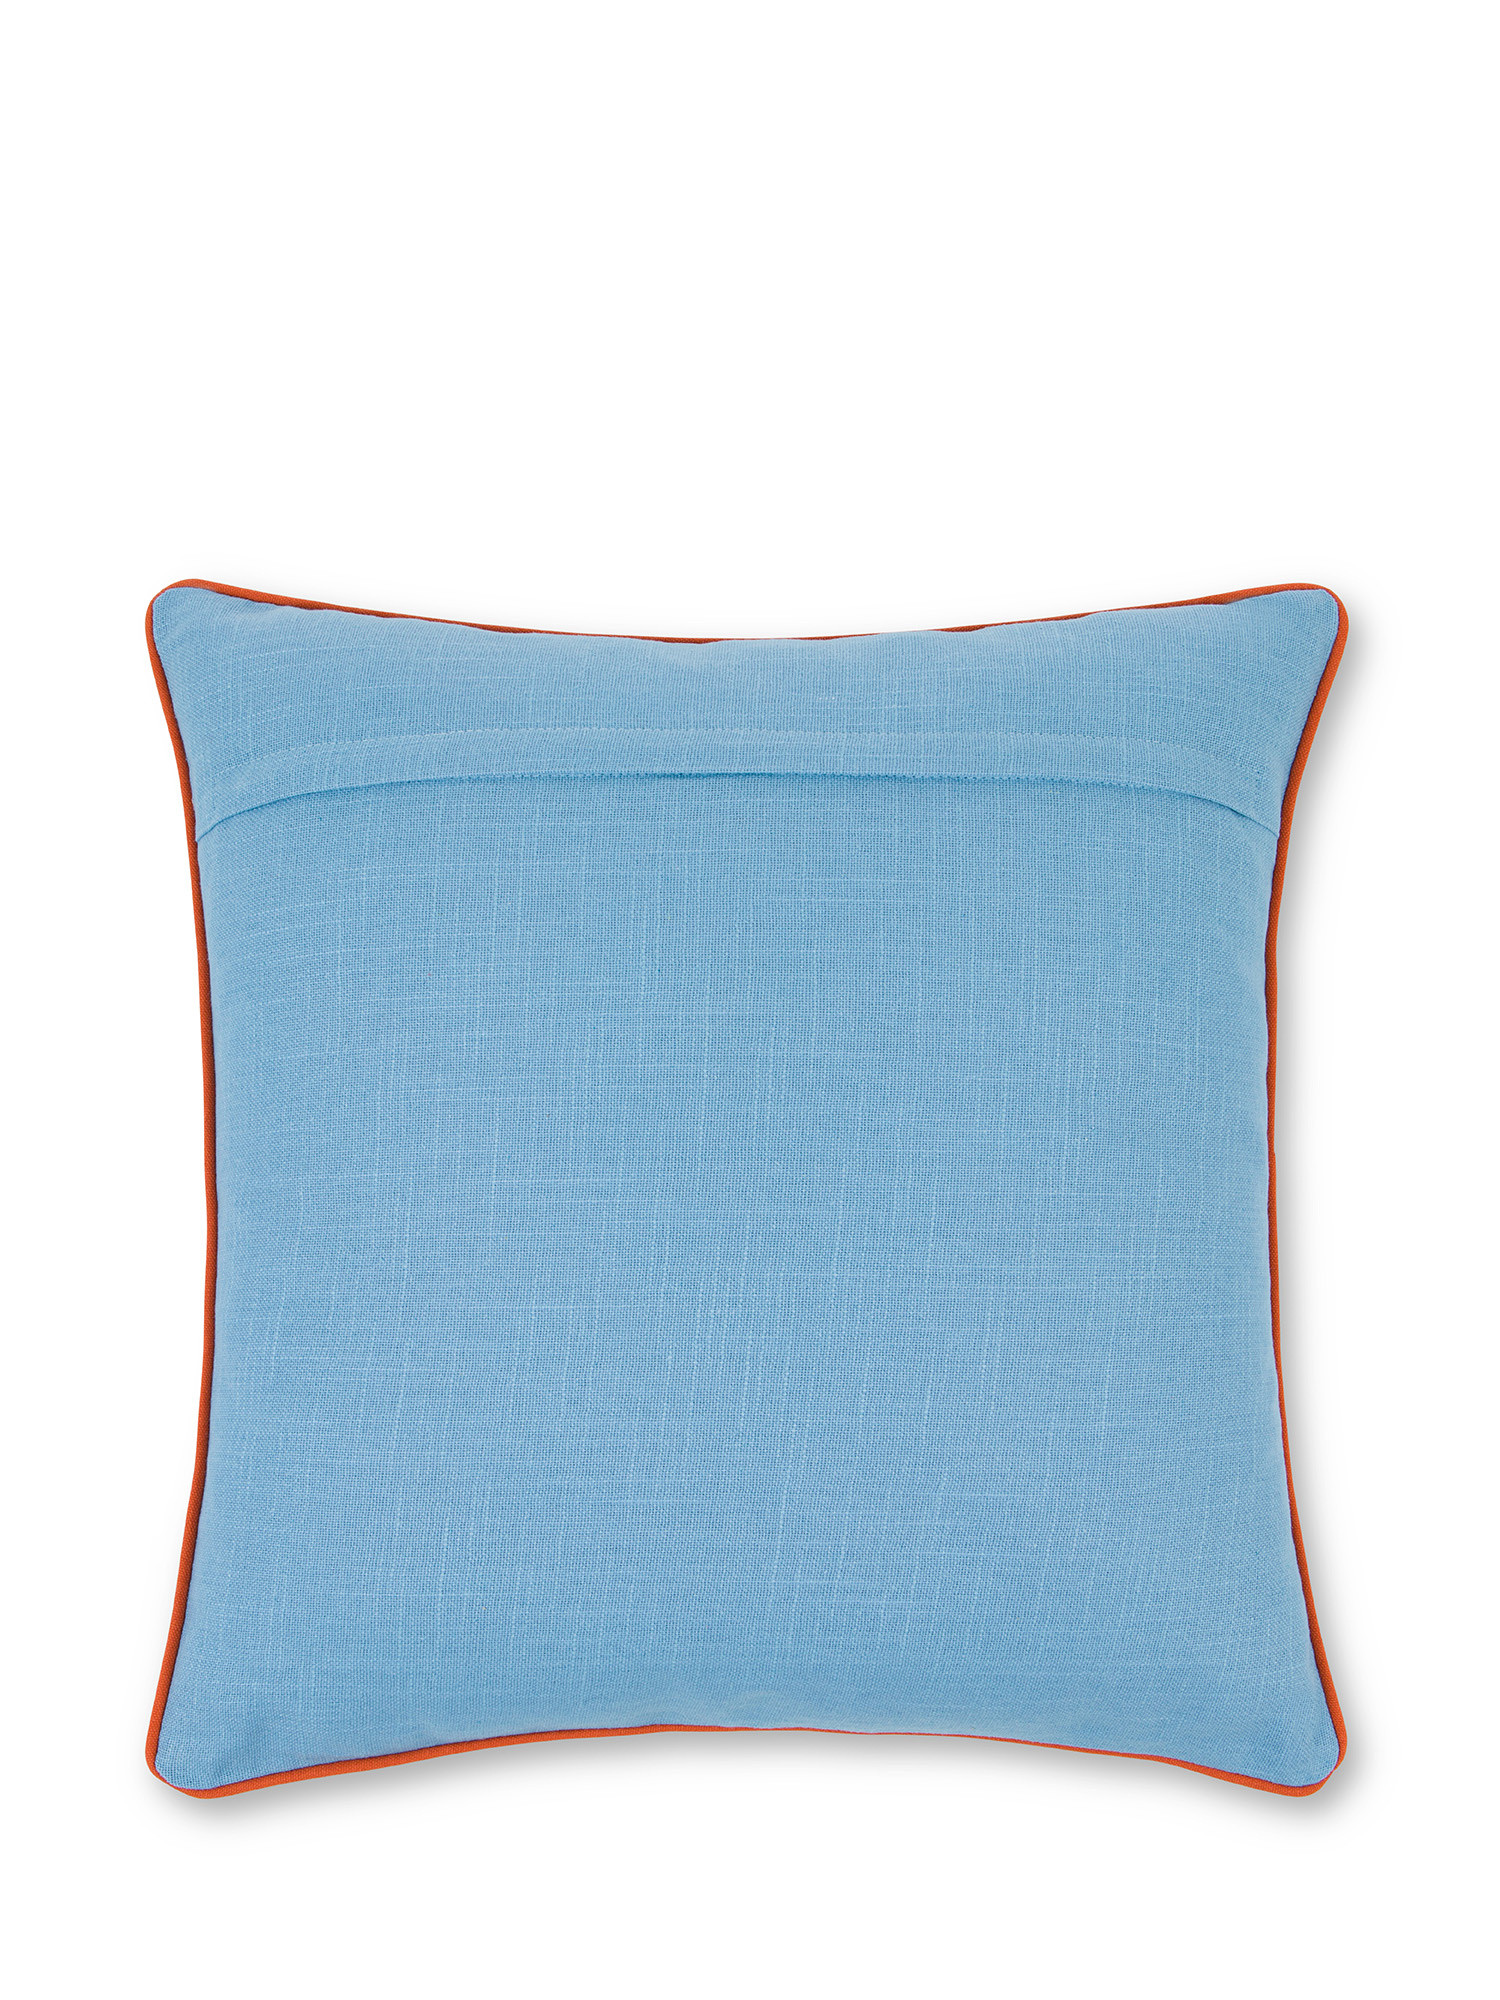 Cotton cushion with embroidery 45x45cm, Light Blue, large image number 1